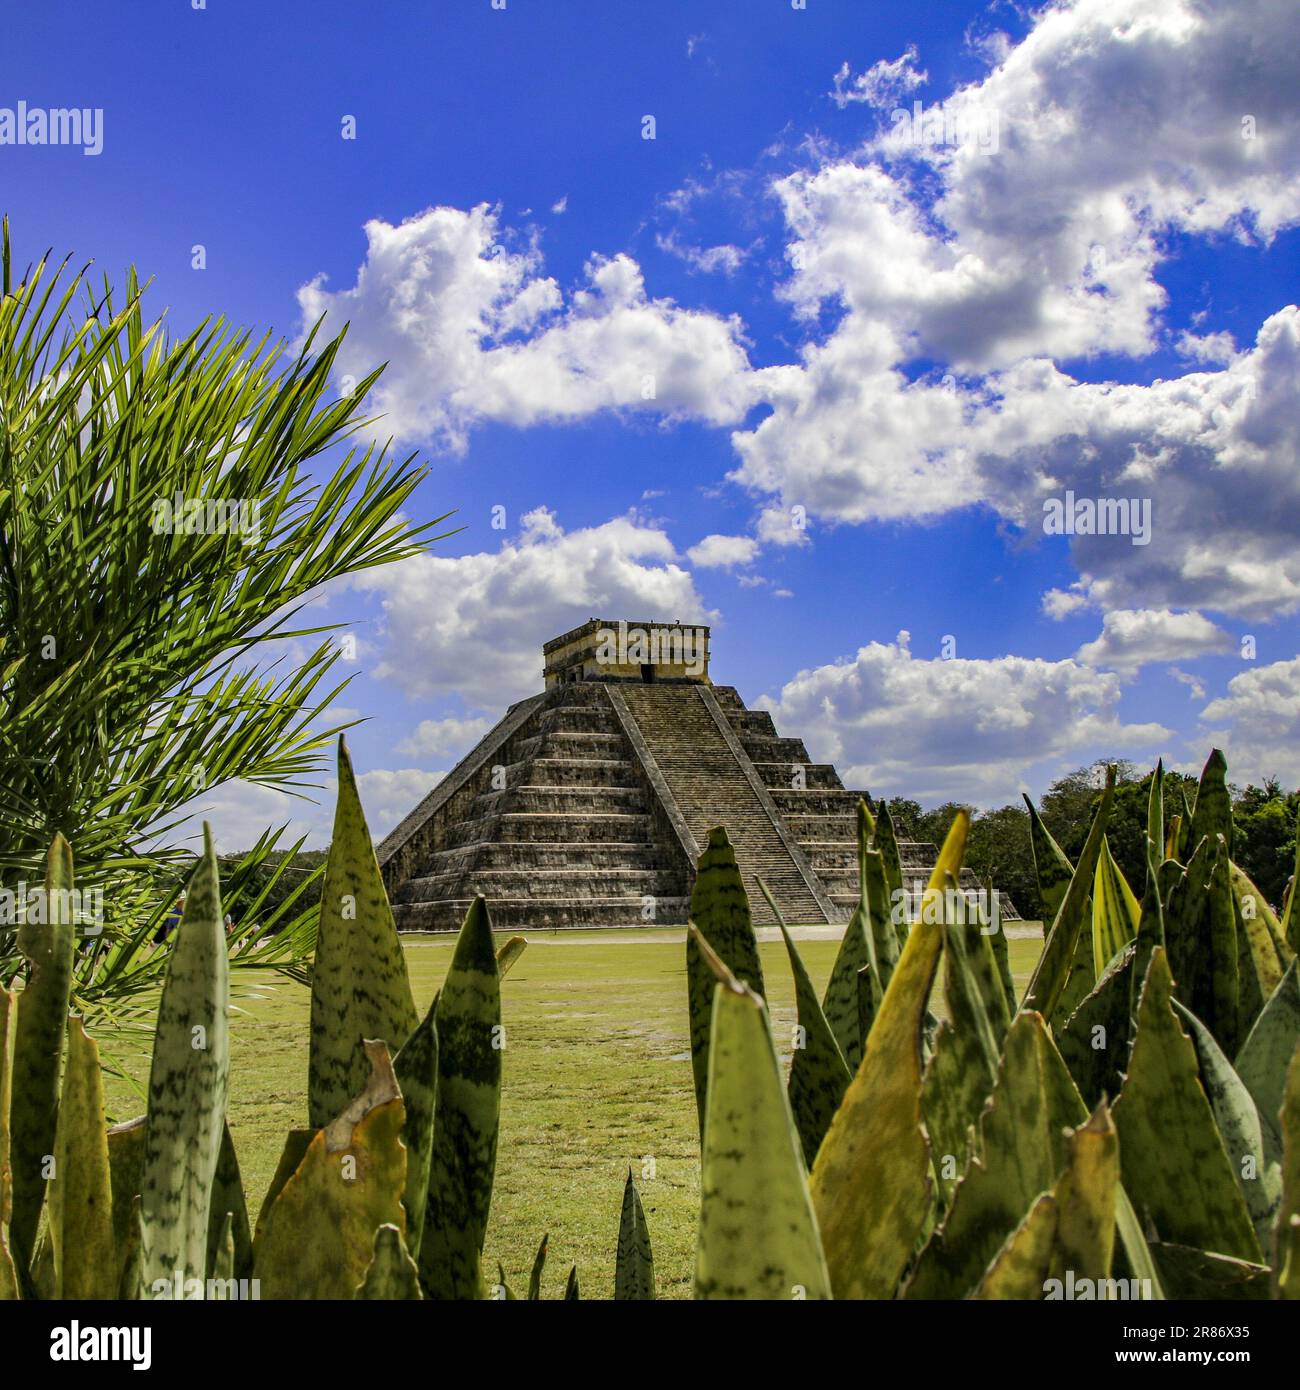 The ancient Chicen Itza ruins under a bright blue sky in Mexico Stock Photo